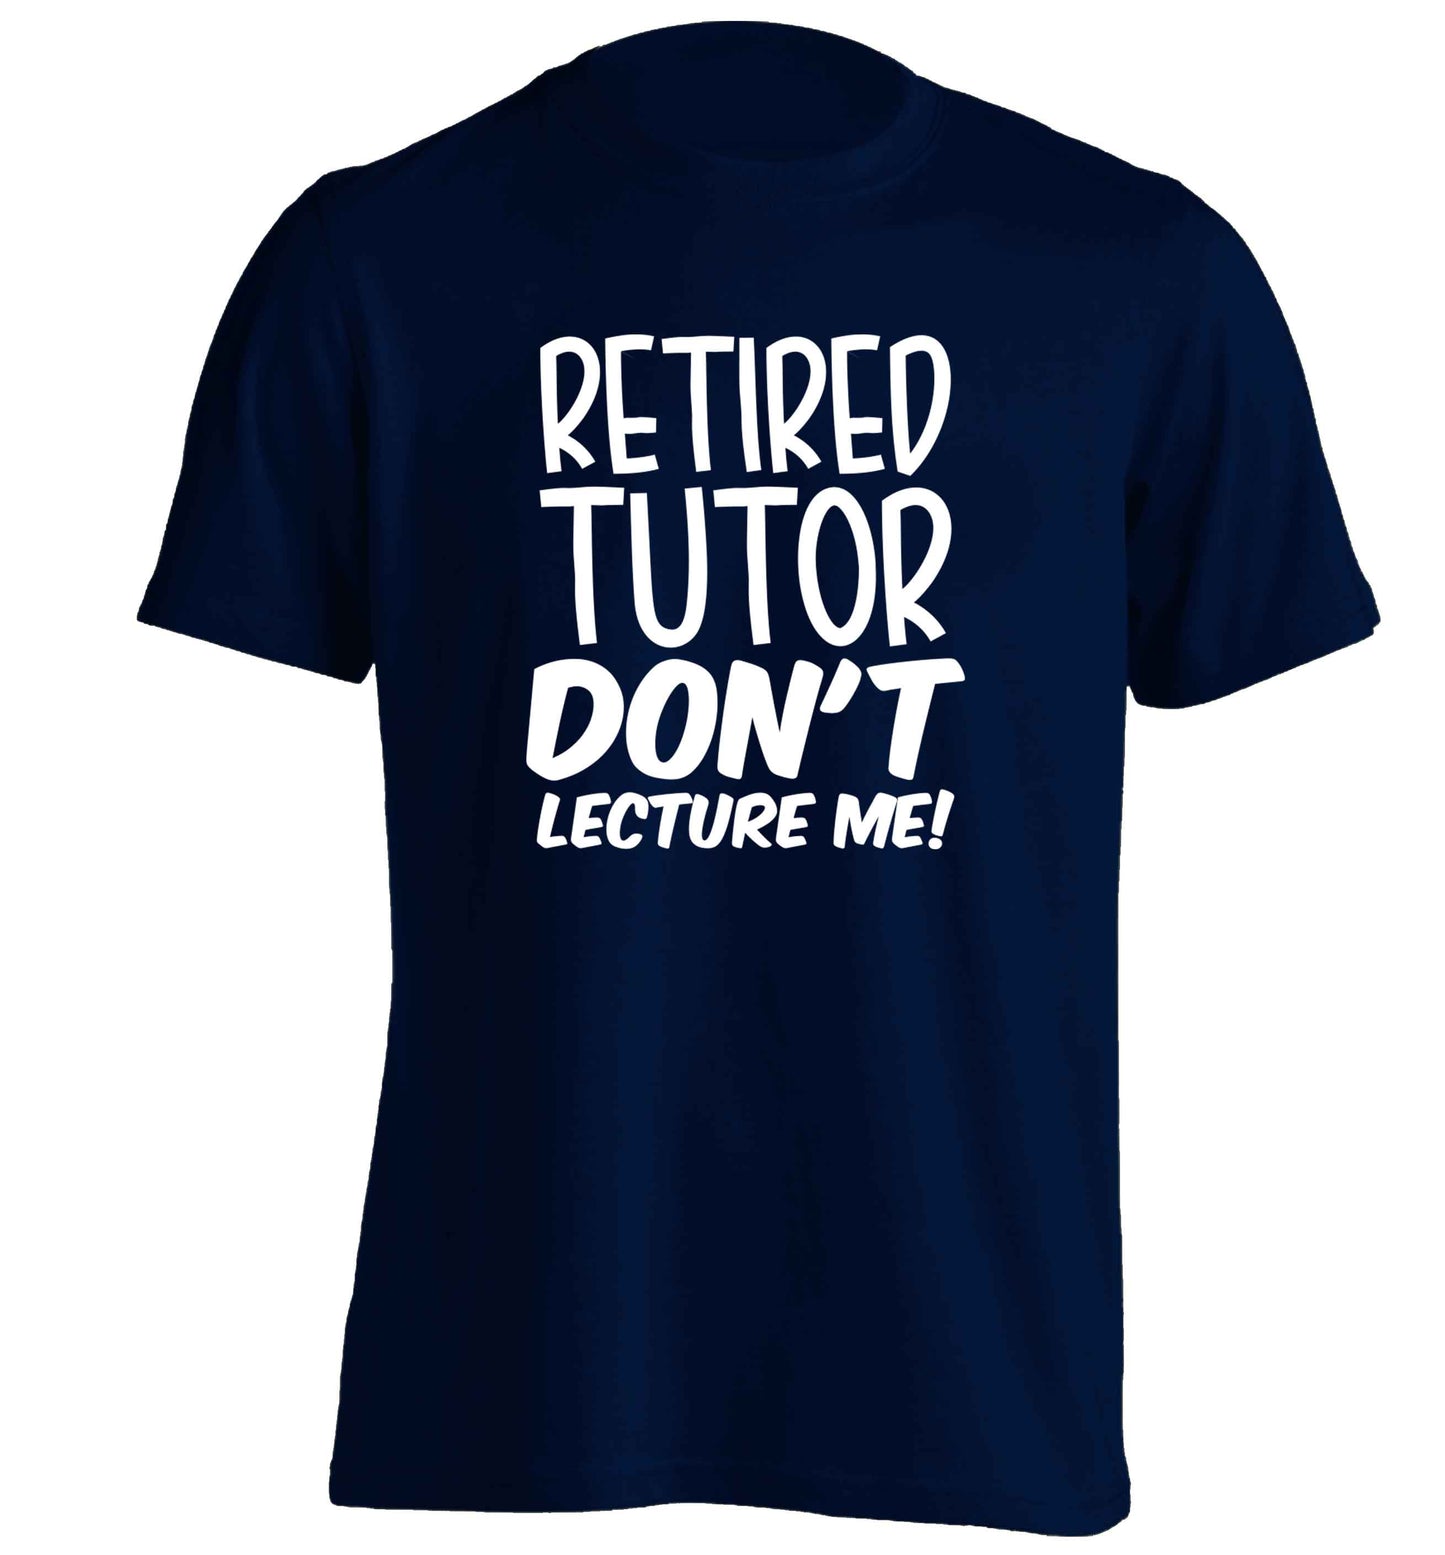 Retired tutor don't lecture me! adults unisex navy Tshirt 2XL